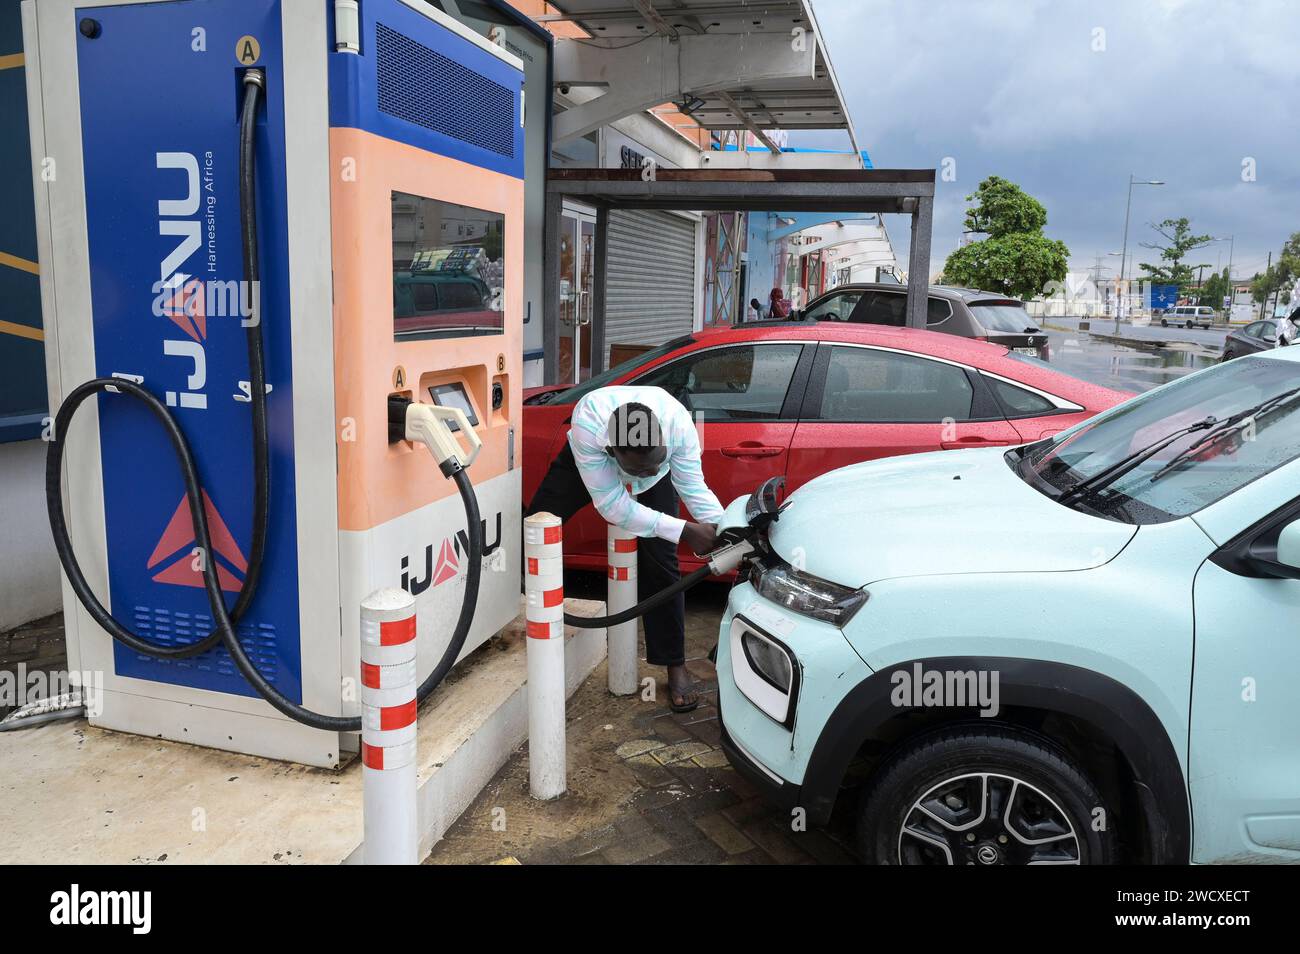 GHANA, Accra, electric mobility, IJANU service and quick charging station for electric cars, charging of chinese Dongfeng EX1 electric car / GHANA, Accra, E-Mobilität, IJANU Service und Ladestation für E-Autos, chinesisches Dongfeng EX1 E-Auto Stock Photo